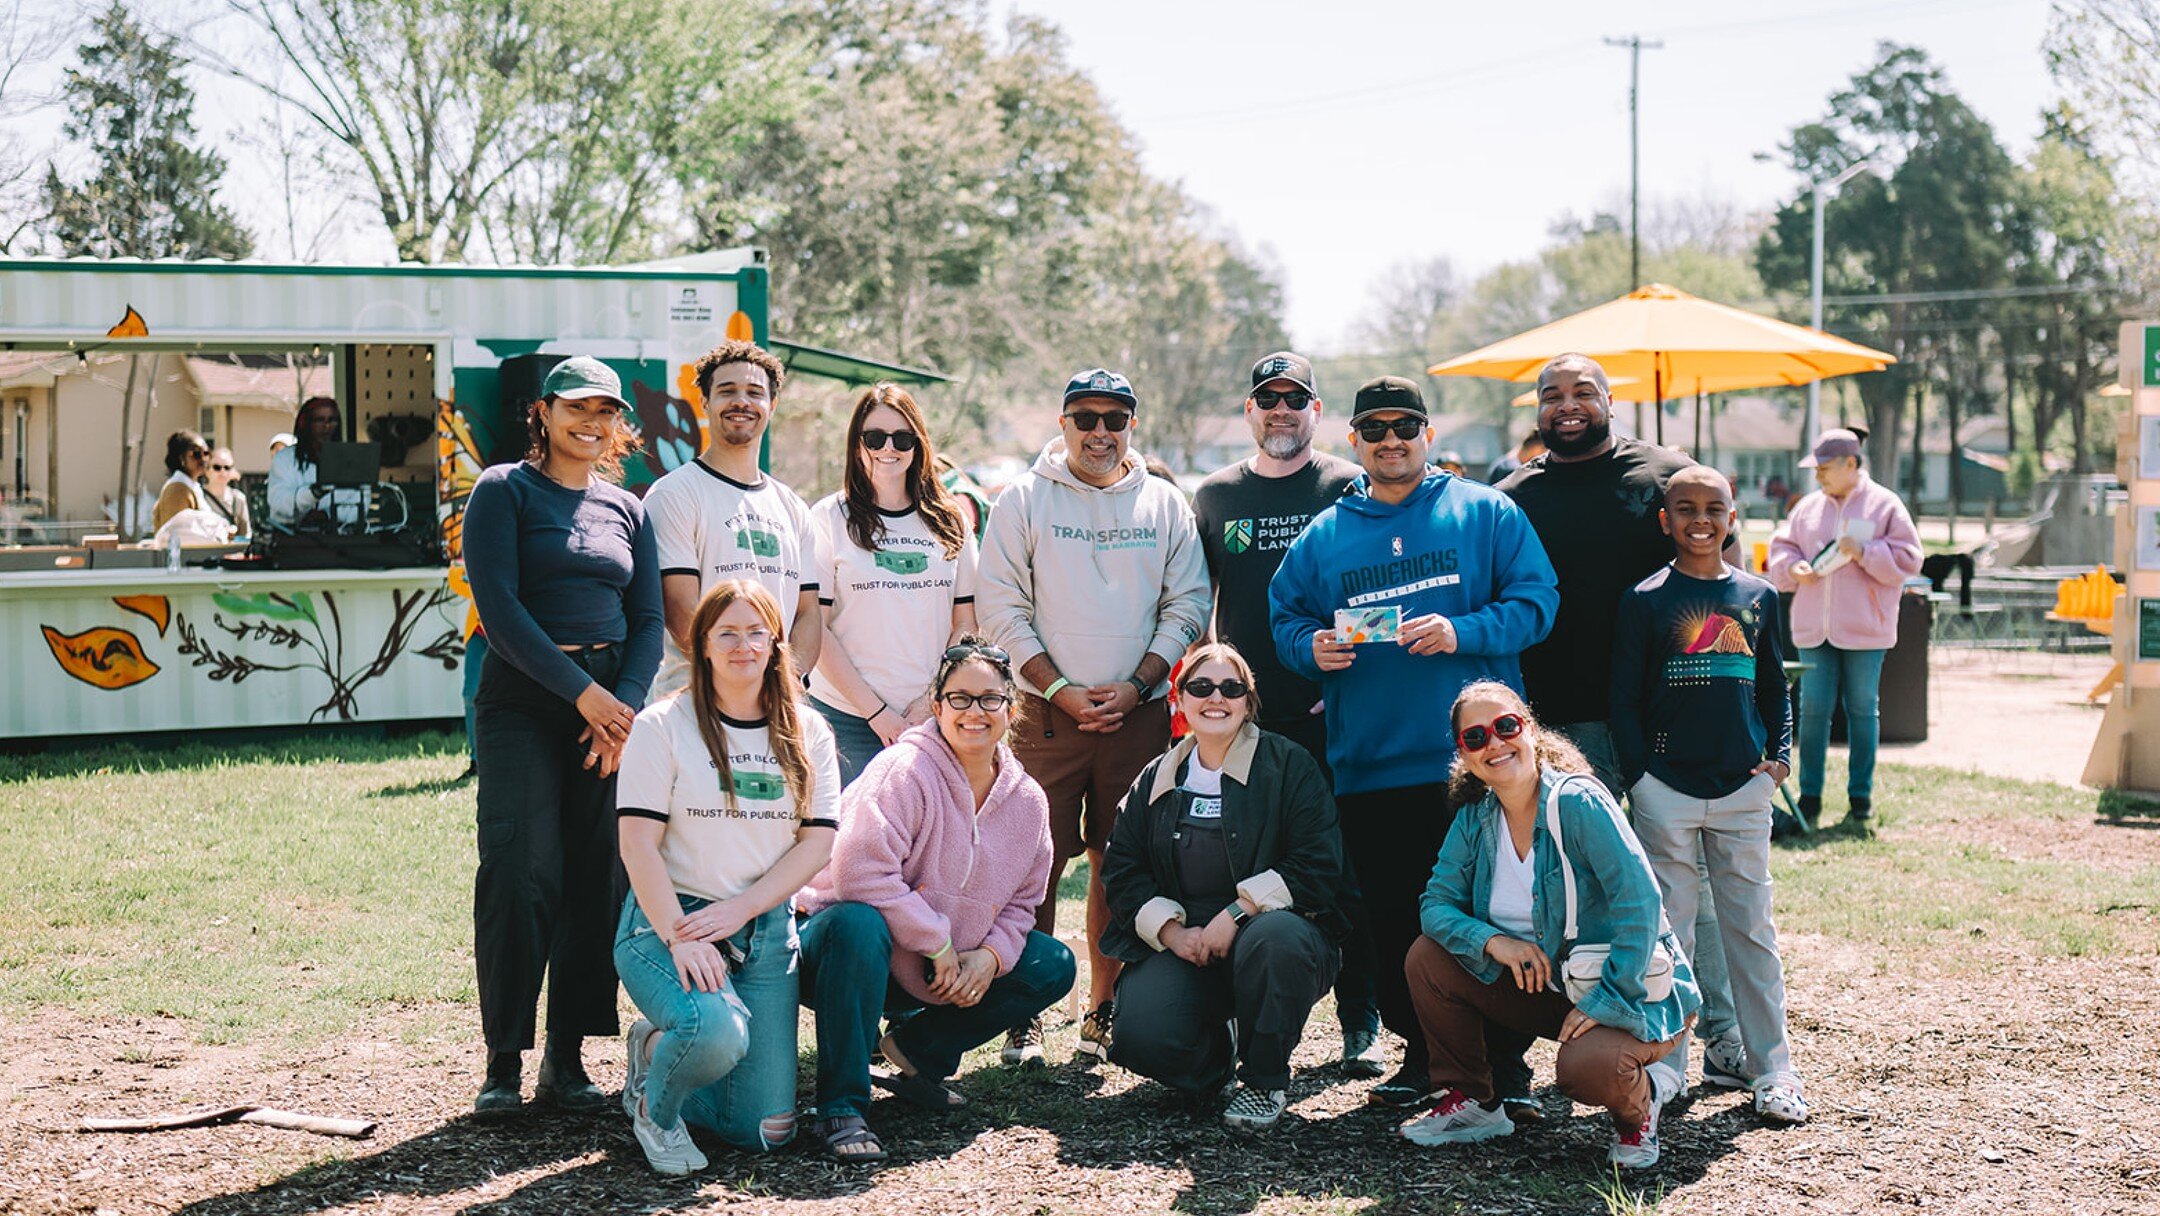 Who doesn&rsquo;t love a good green space? As part of Dallas&rsquo; new Greening Initiative which aims to reduce the park equity gap throughout Dallas neighborhoods, we are working alongside @trustforpublicland, @betterblock, and Dallas Parks and Rec